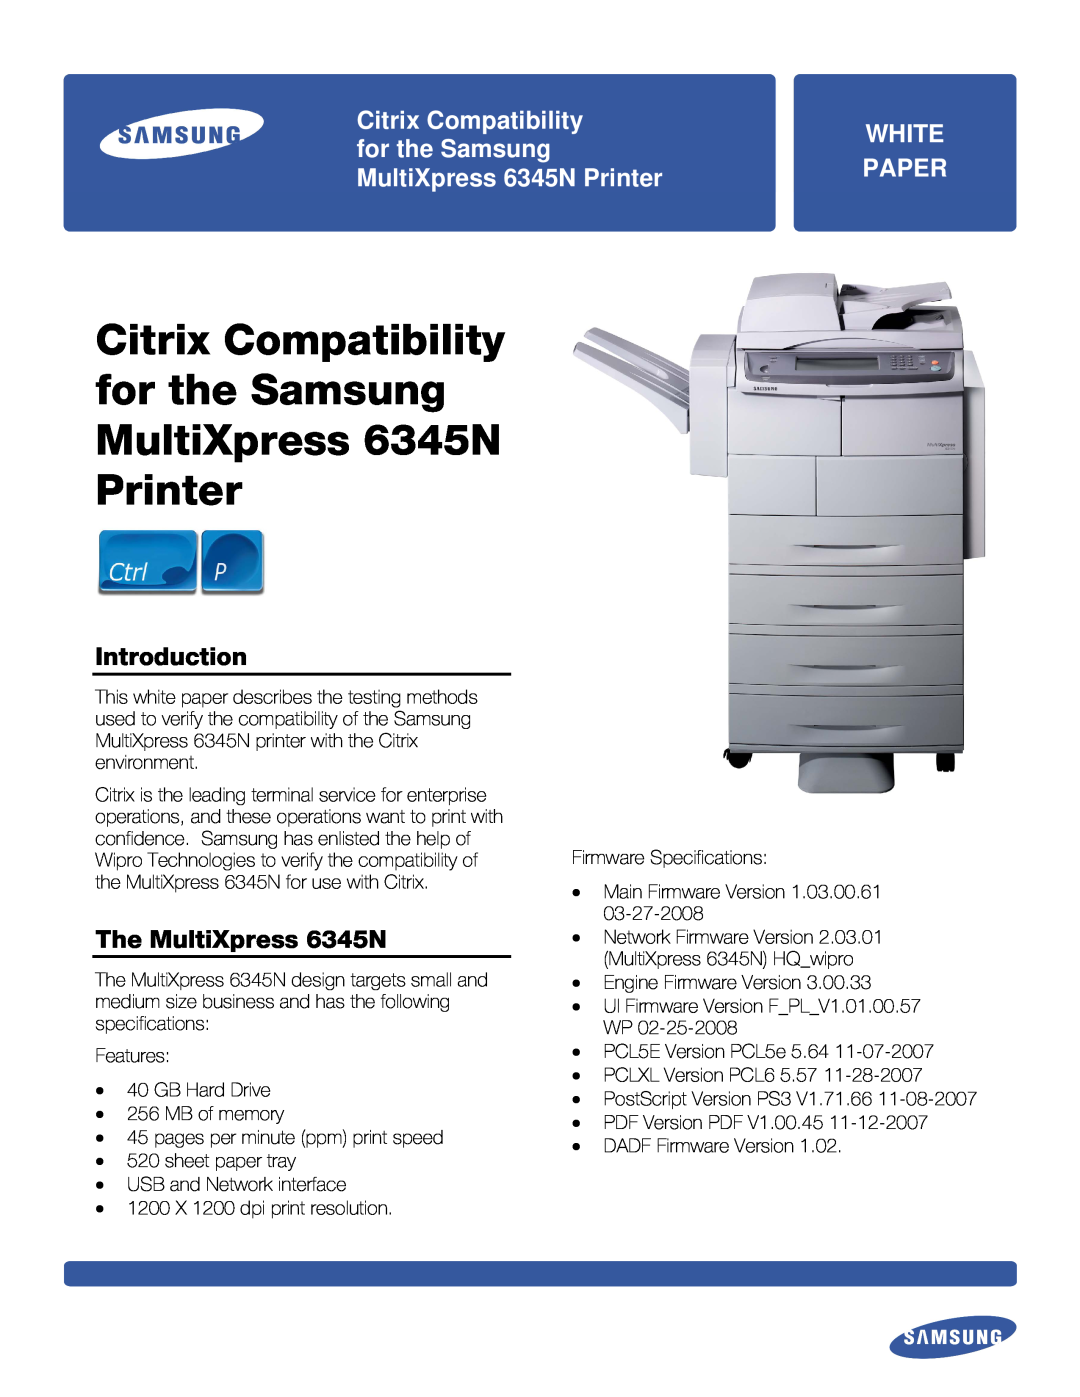 Samsung specifications Introduction, The MultiXpress 6345N, Citrix Compatibility, White, for the Samsung, Paper 